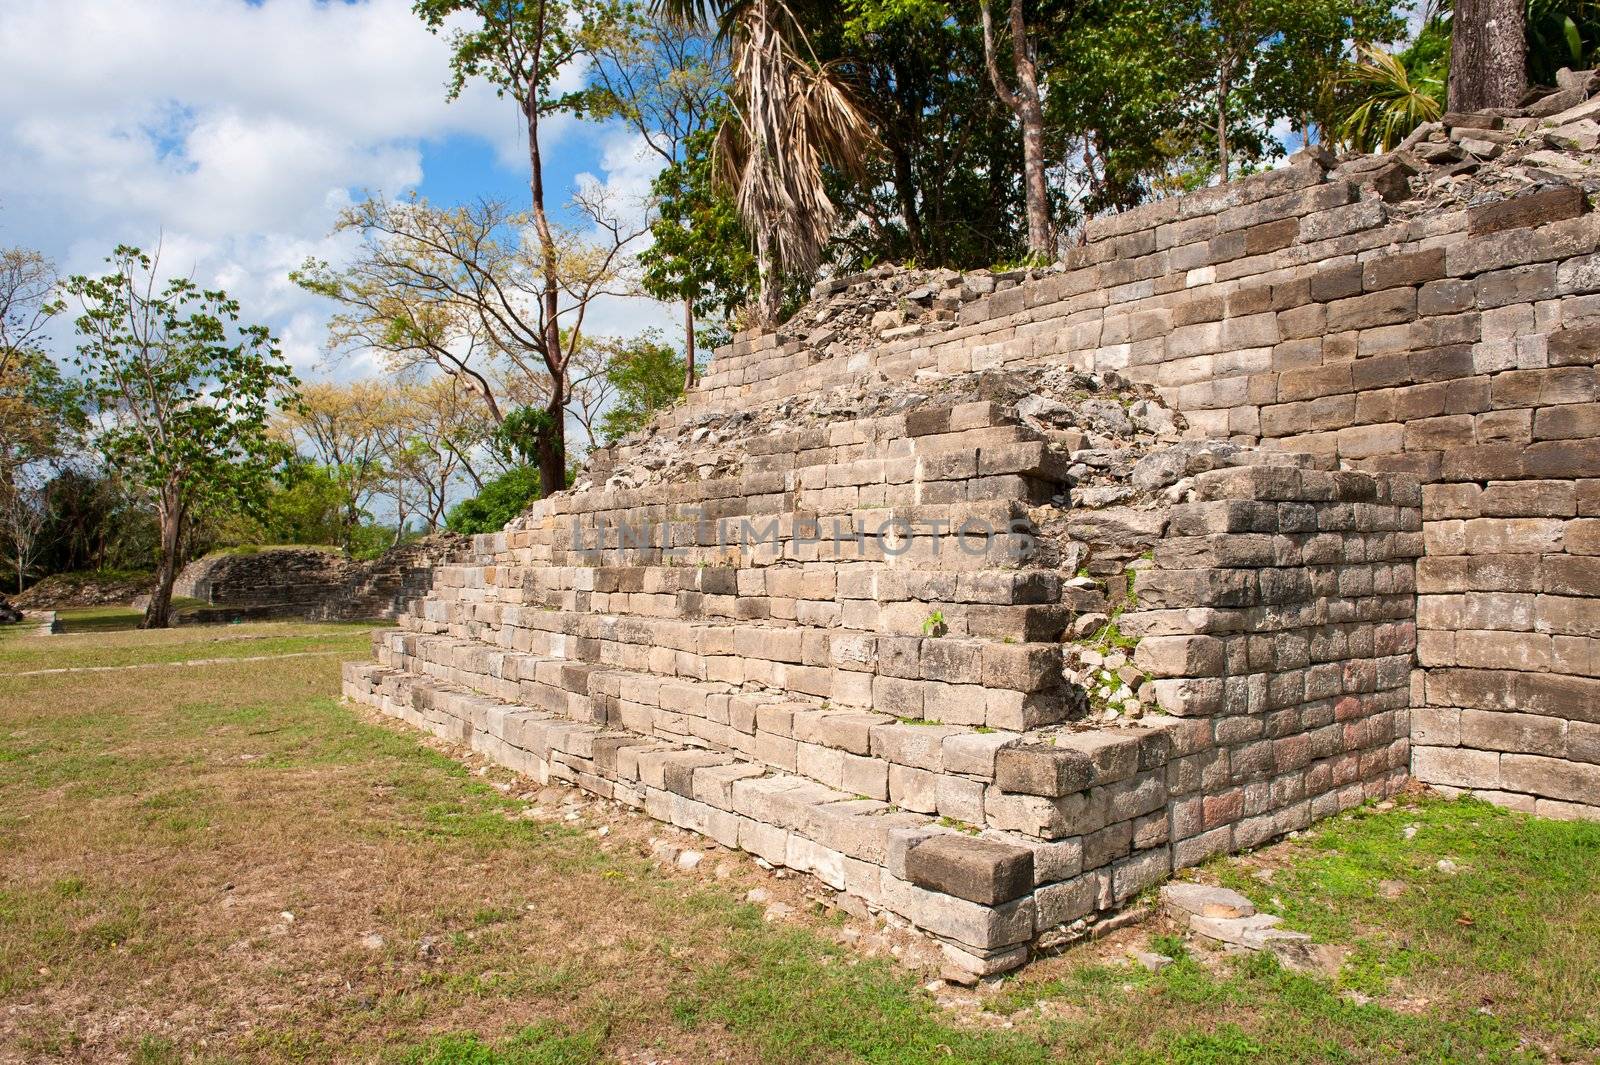 Maya temple in the ancient city of Lubaantum, southern Belize.